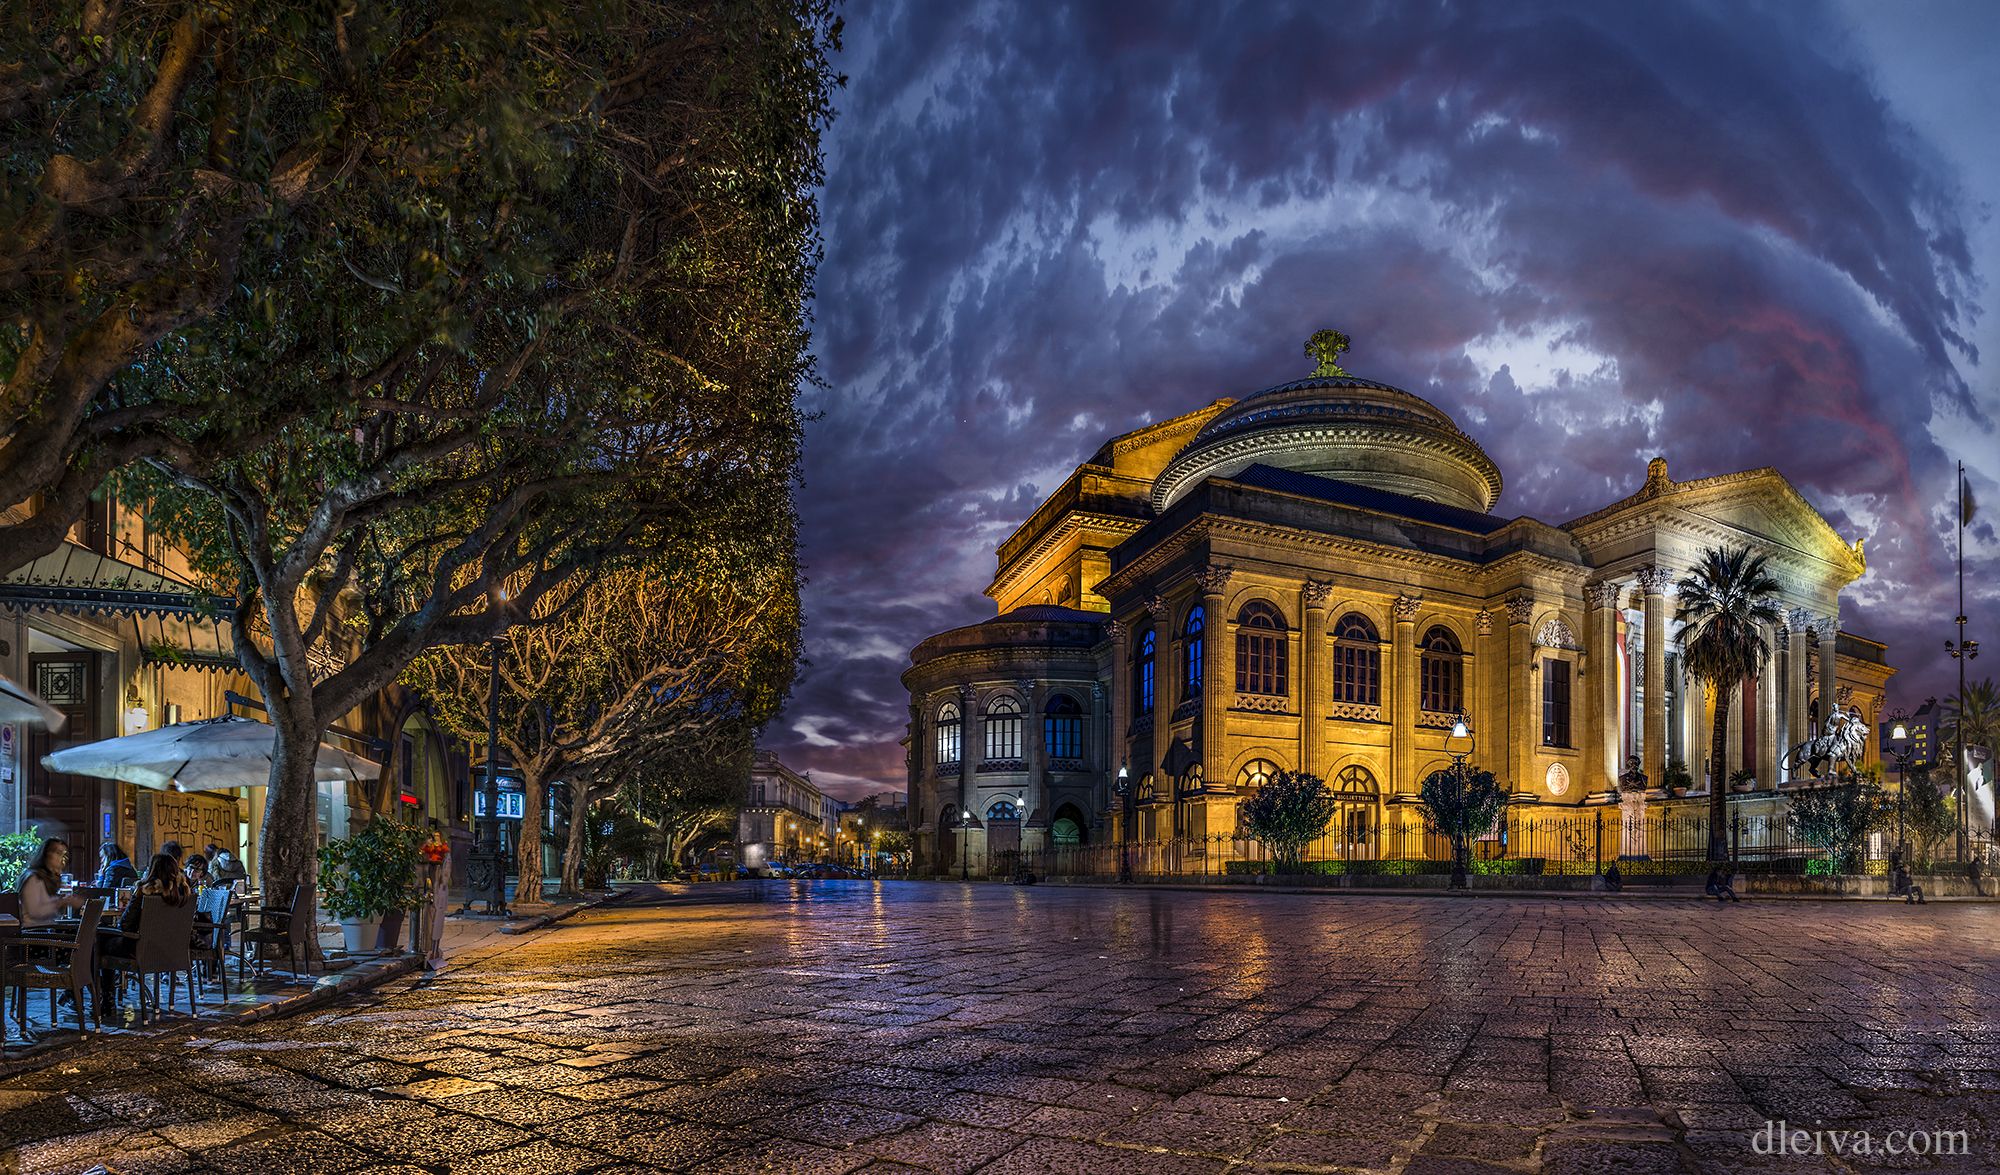 Sicily Palermo Night Theater Architecture Italy Lights Trees Square Watermarked 2000x1175